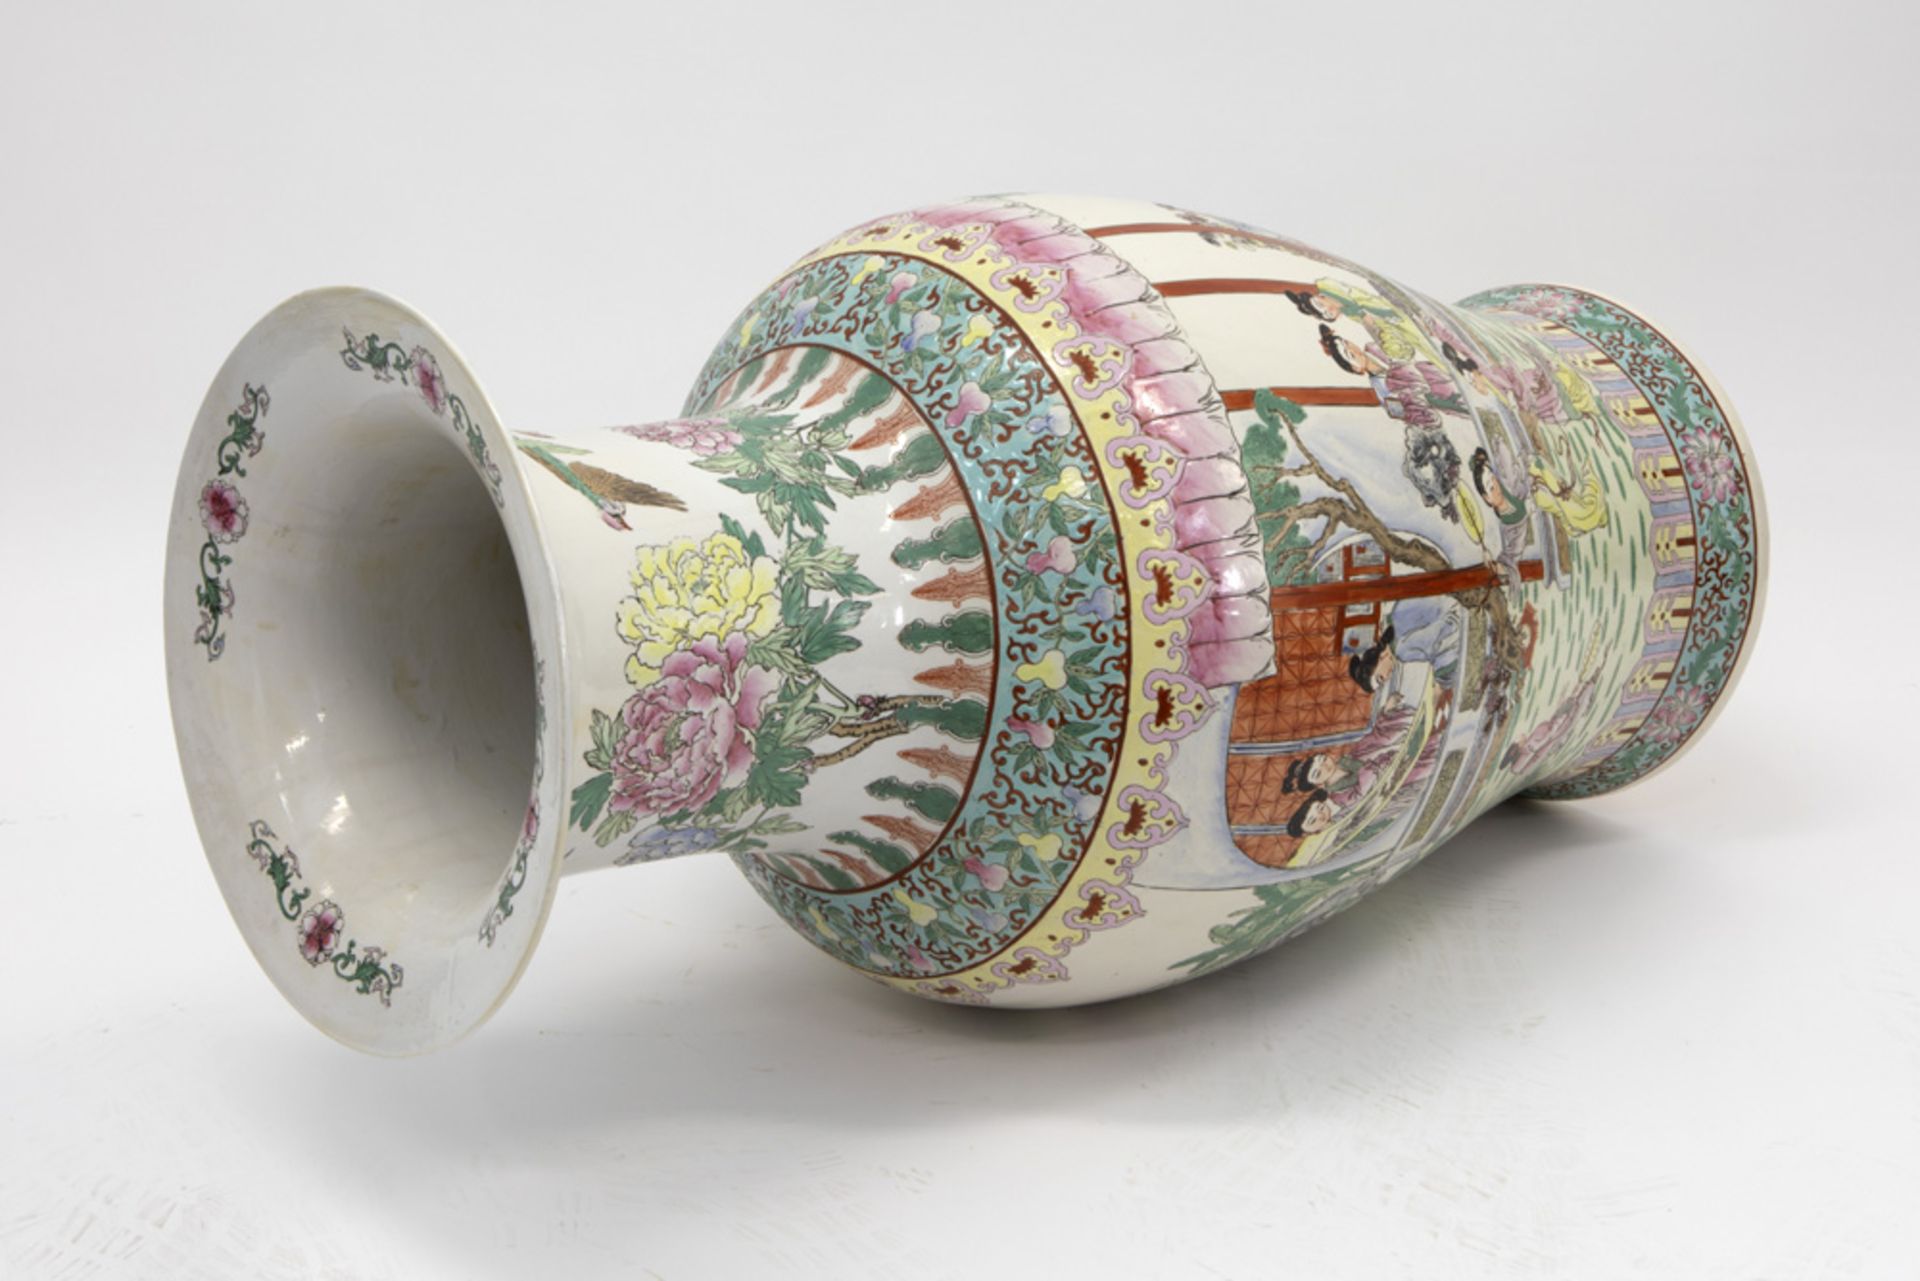 20th Cent. Chinese vase in porcelain with a polychrome decor || 20ste eeuwse Chinese vaas in - Bild 4 aus 6